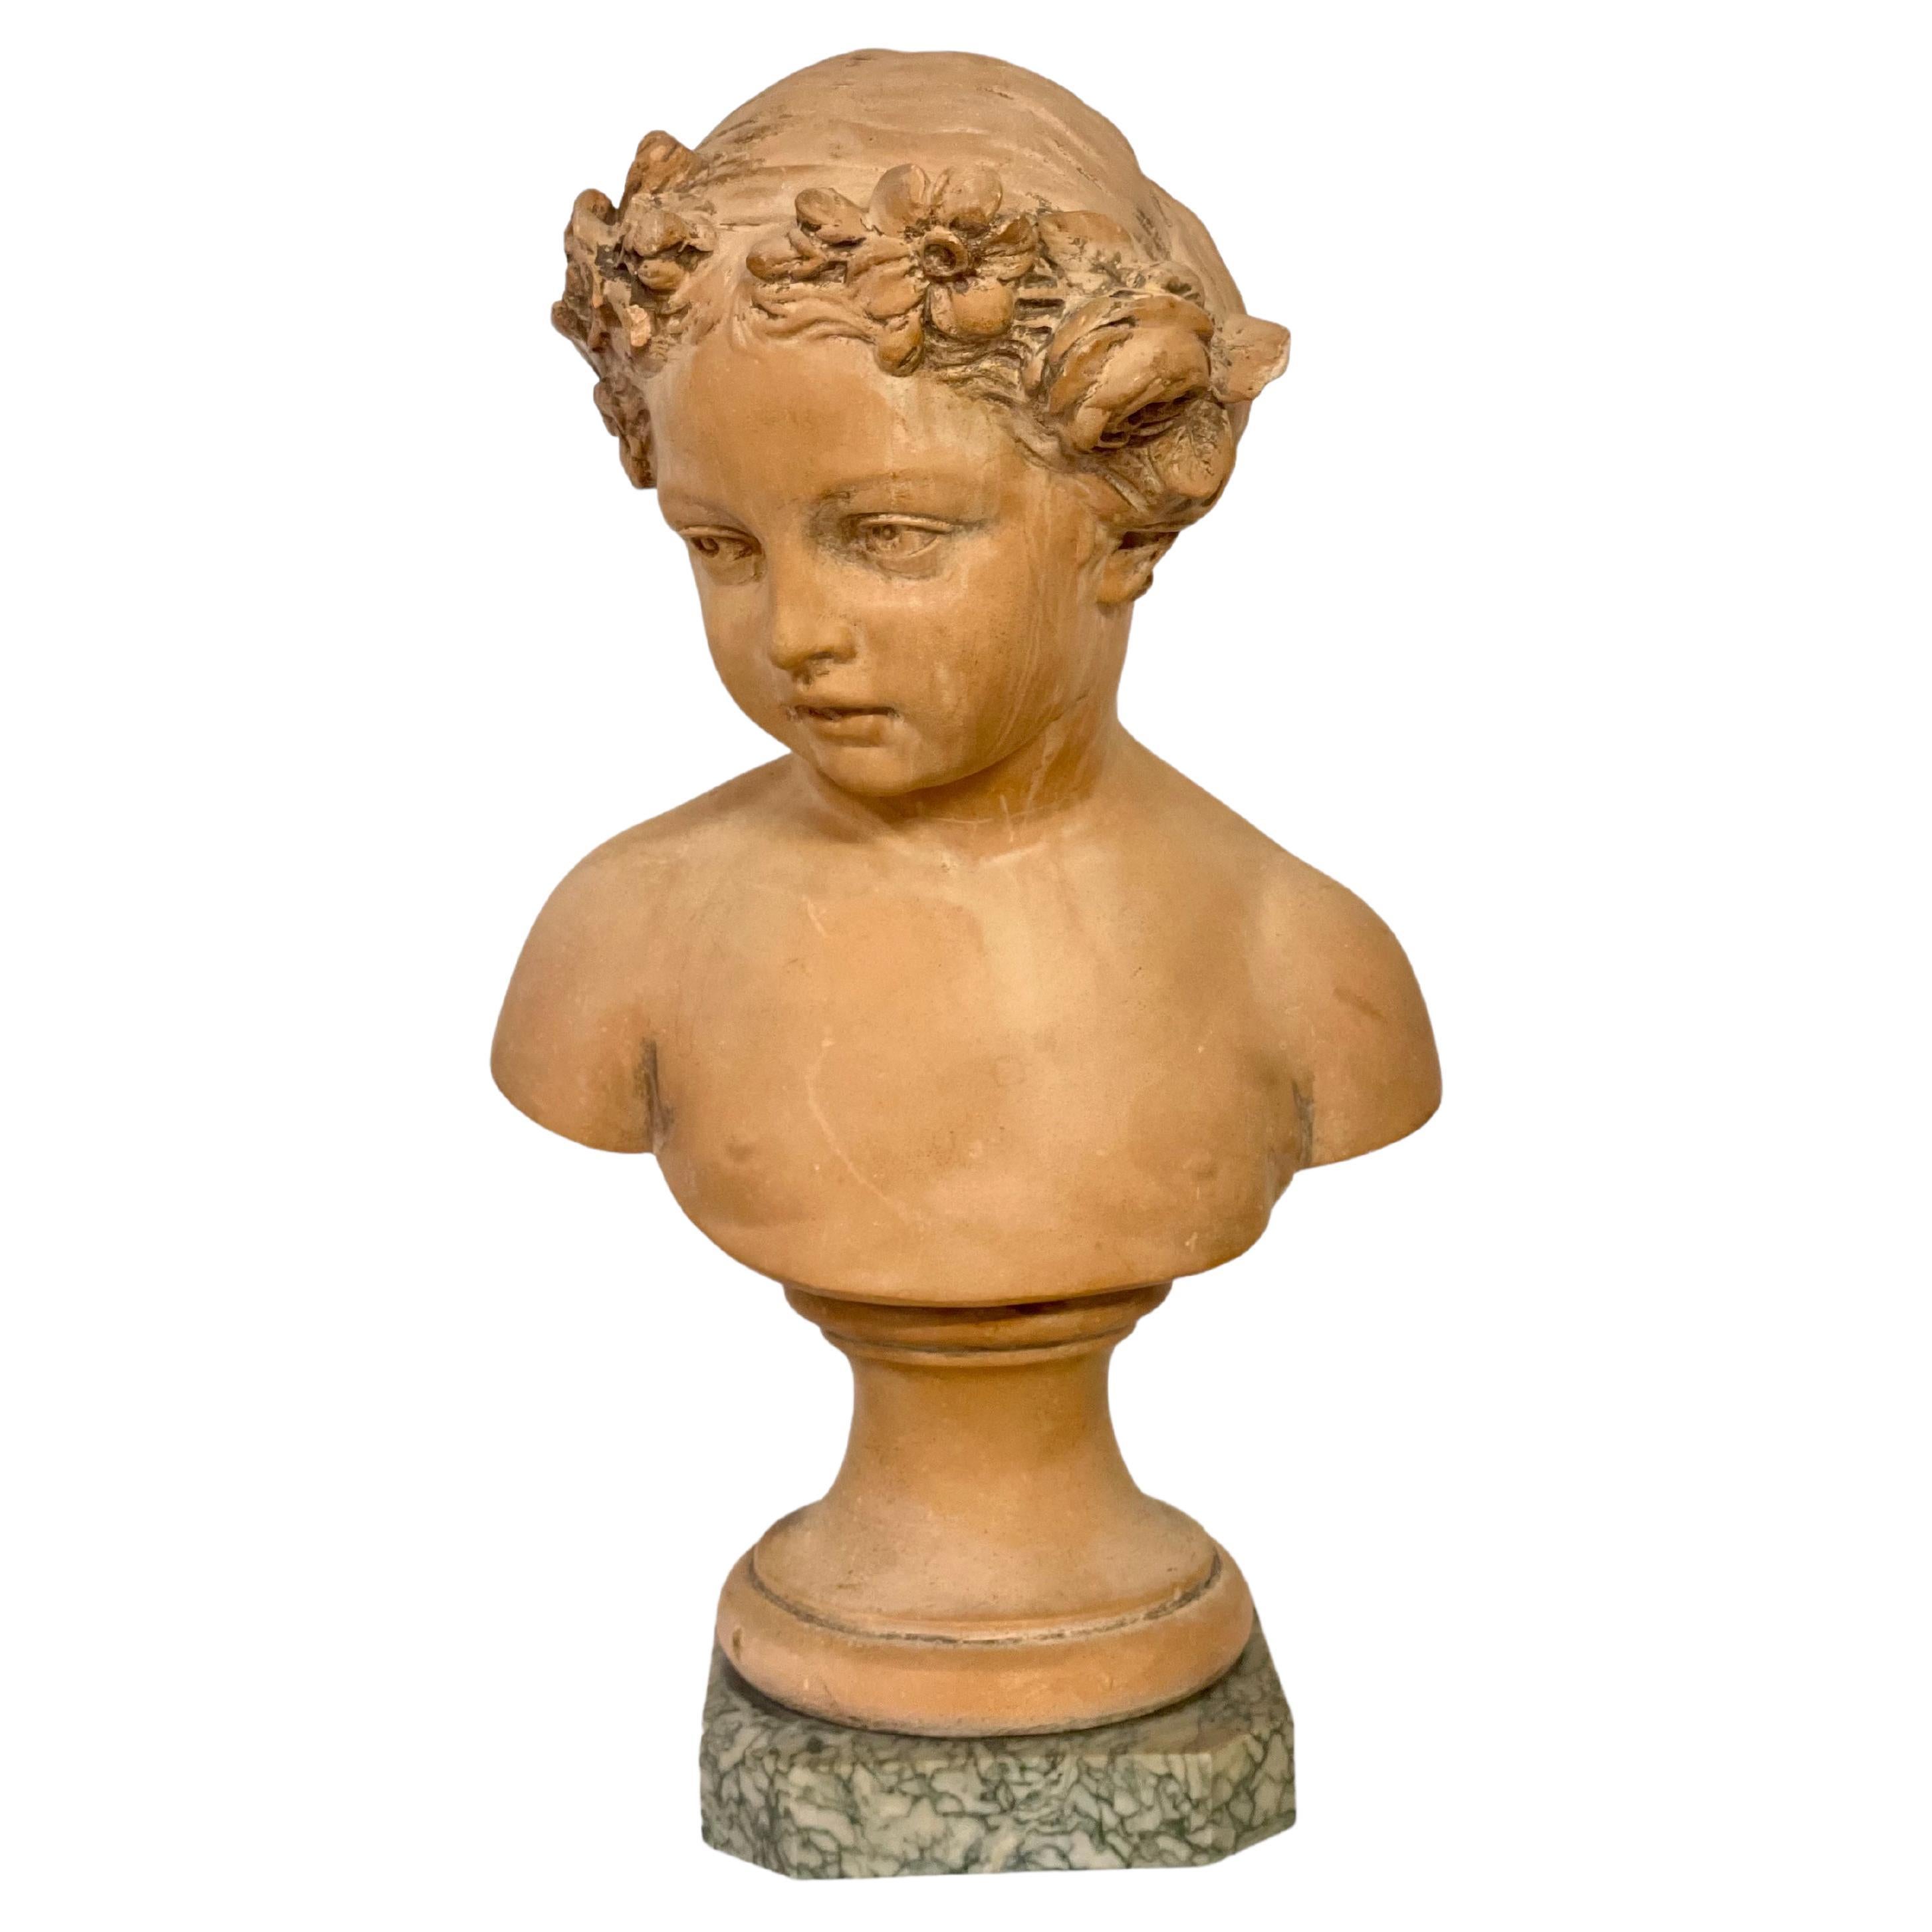 19th Century Terracotta Bust of Young Maiden in a Romantic Style